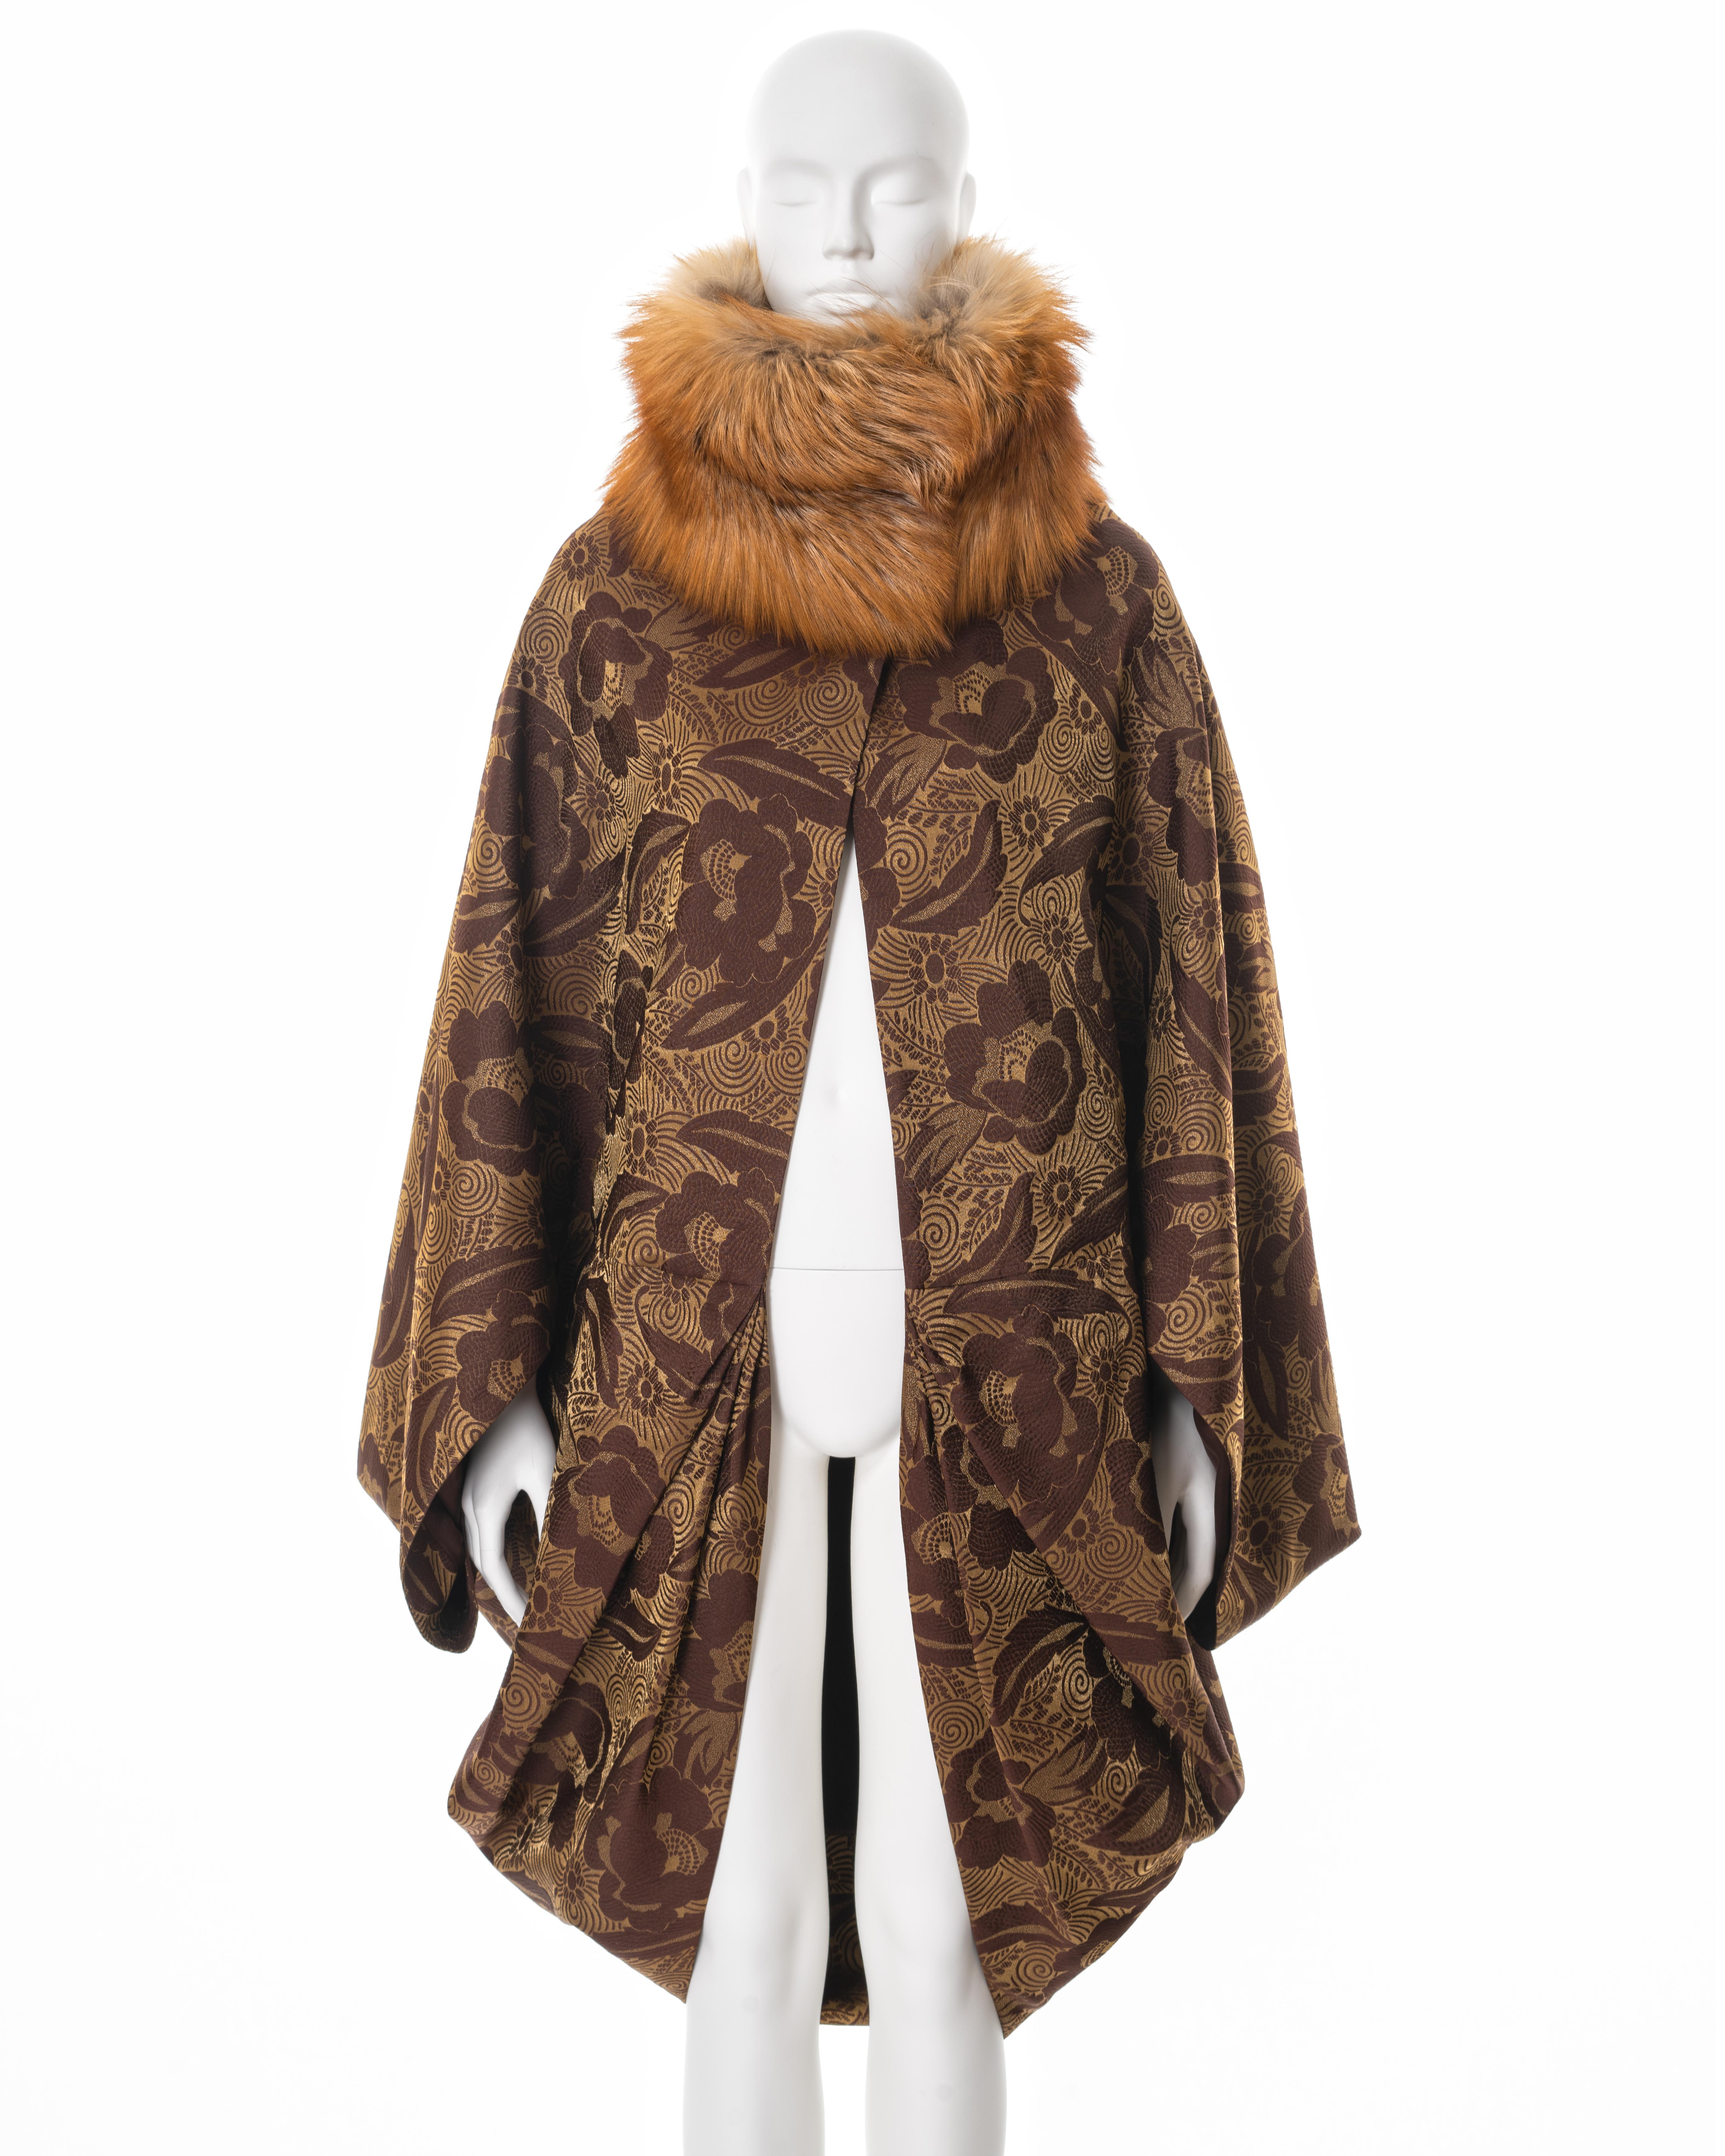 ▪ Christian Dior cocoon coat
▪ Creative Director: John Galliano
▪ Sold by One of a Kind Archive
▪ Spring-Summer 2008
▪ Constructed from brown and gold silk damask 
▪ Fox fur standing collar with invisible hook fastenings 
▪ Brown silk lining 
▪ Can